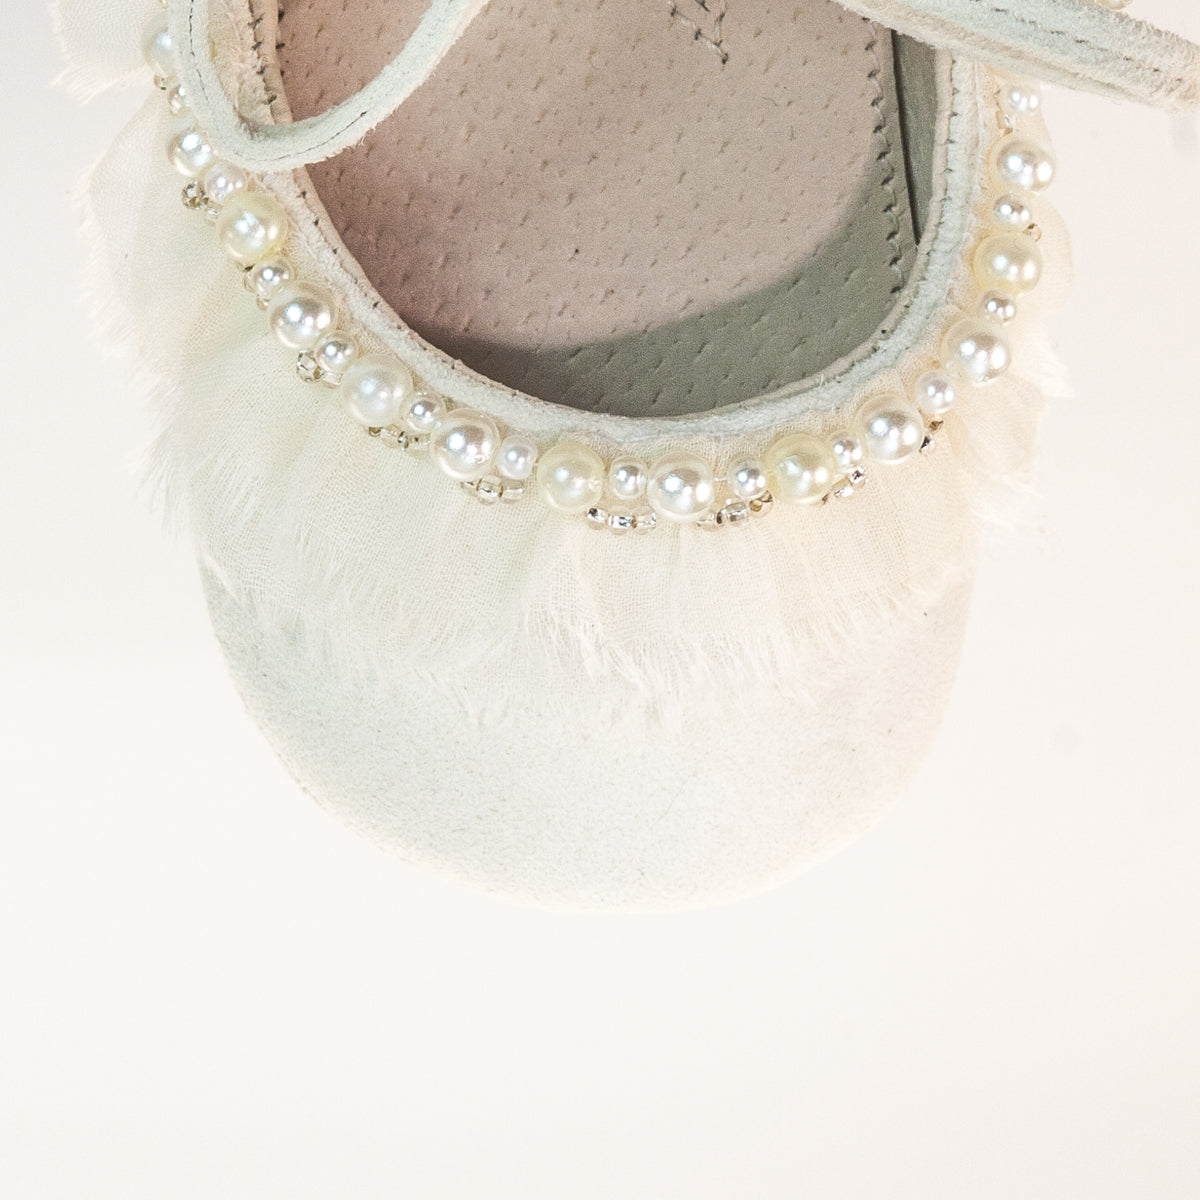 Vibys-Baby-Shoes-Dewdrop-details-toe-view